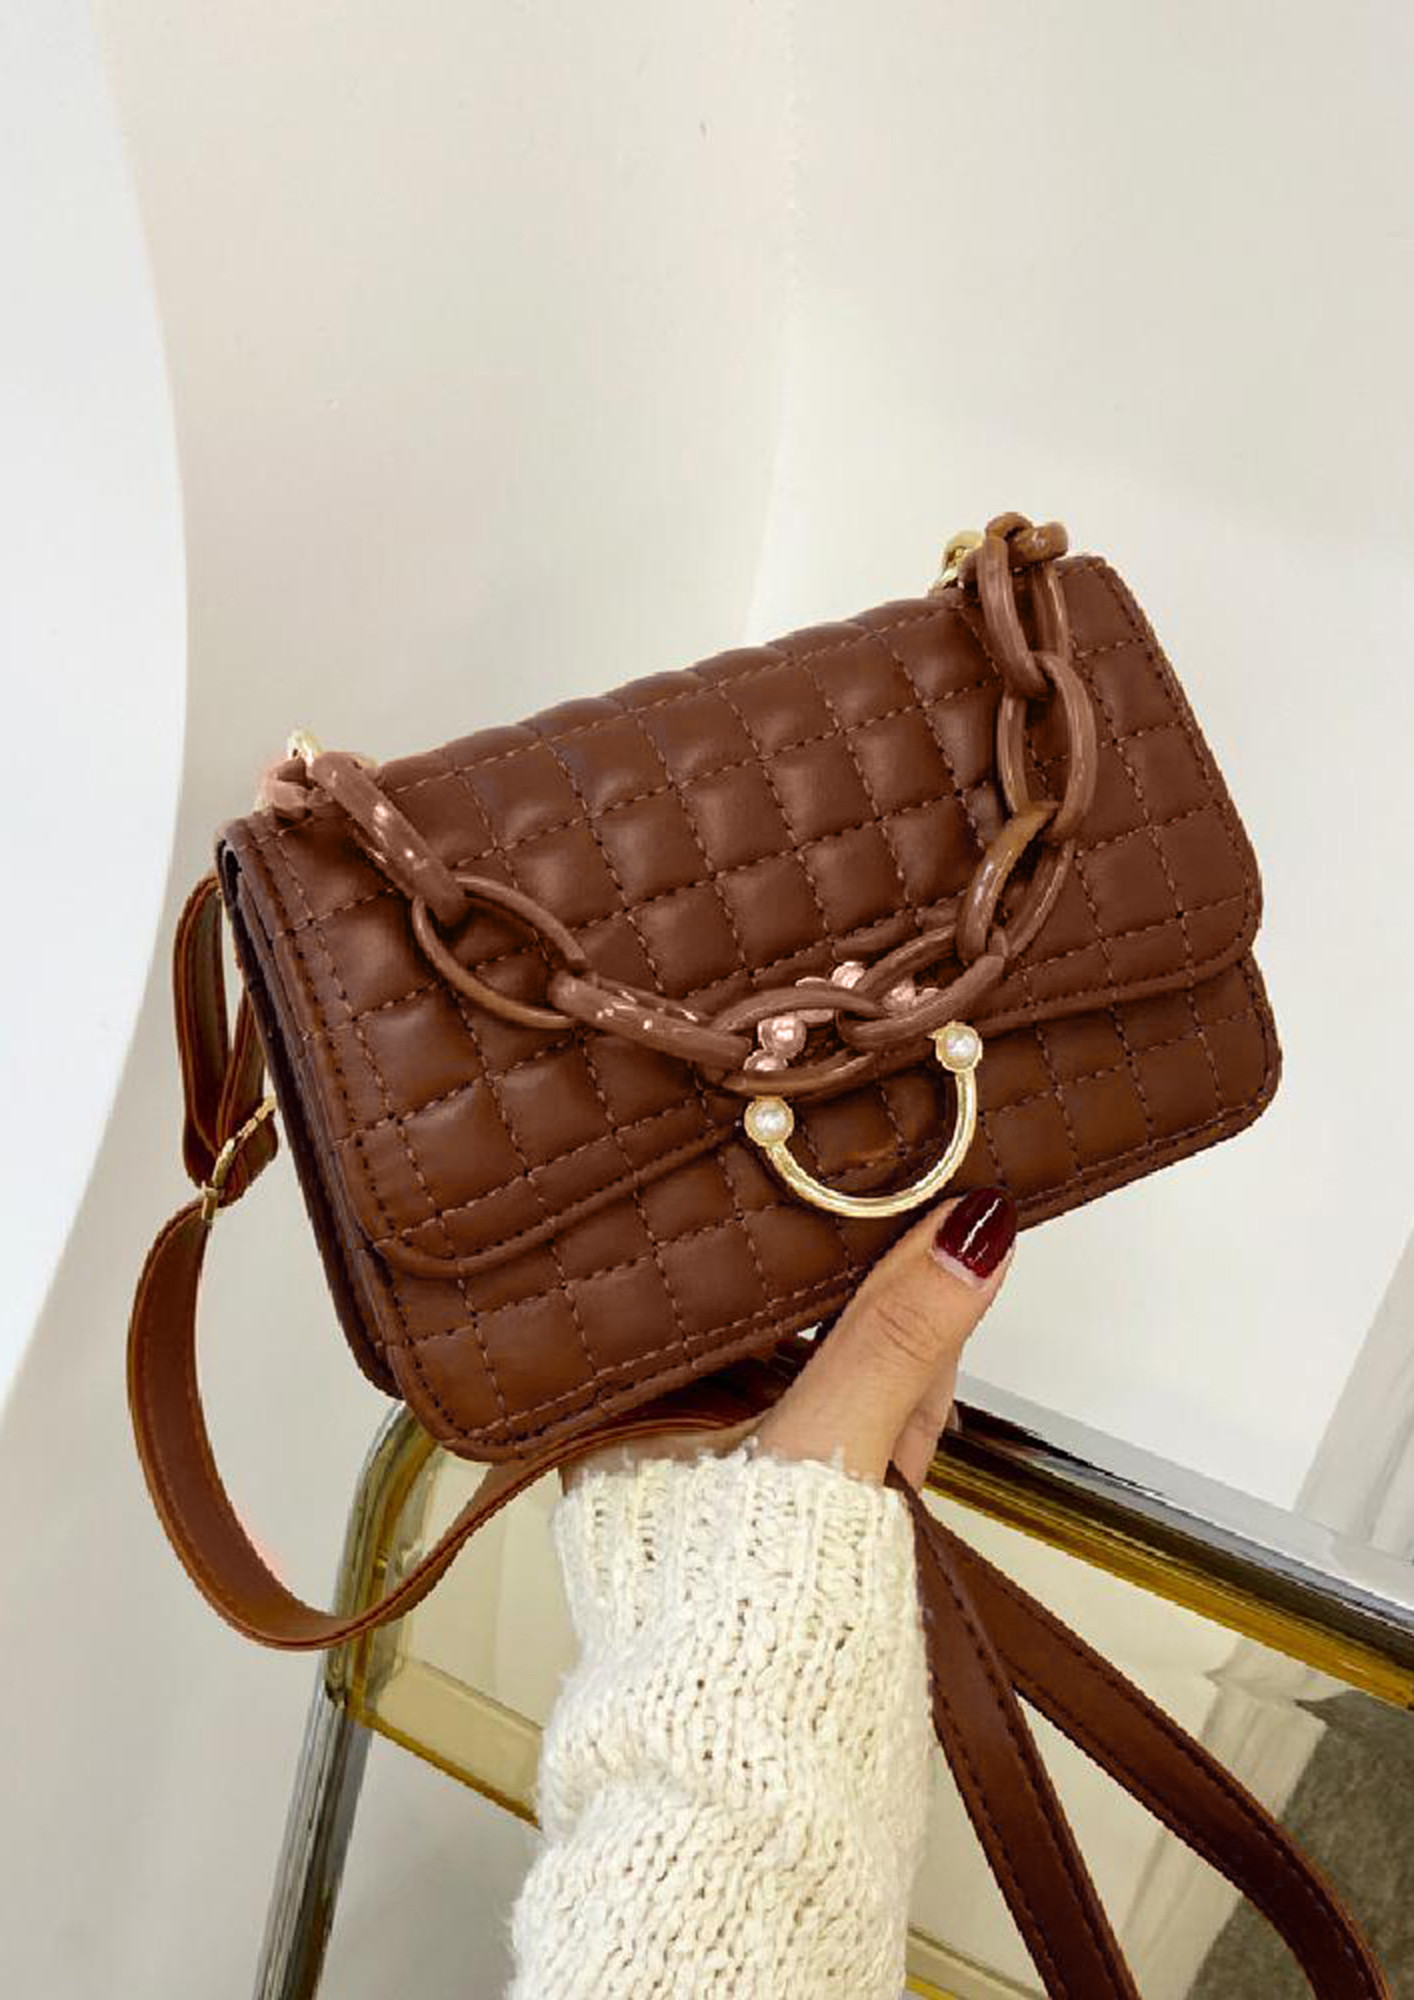 SNAPPY-PEARL-LOCK BROWN QUILTED HANDBAG